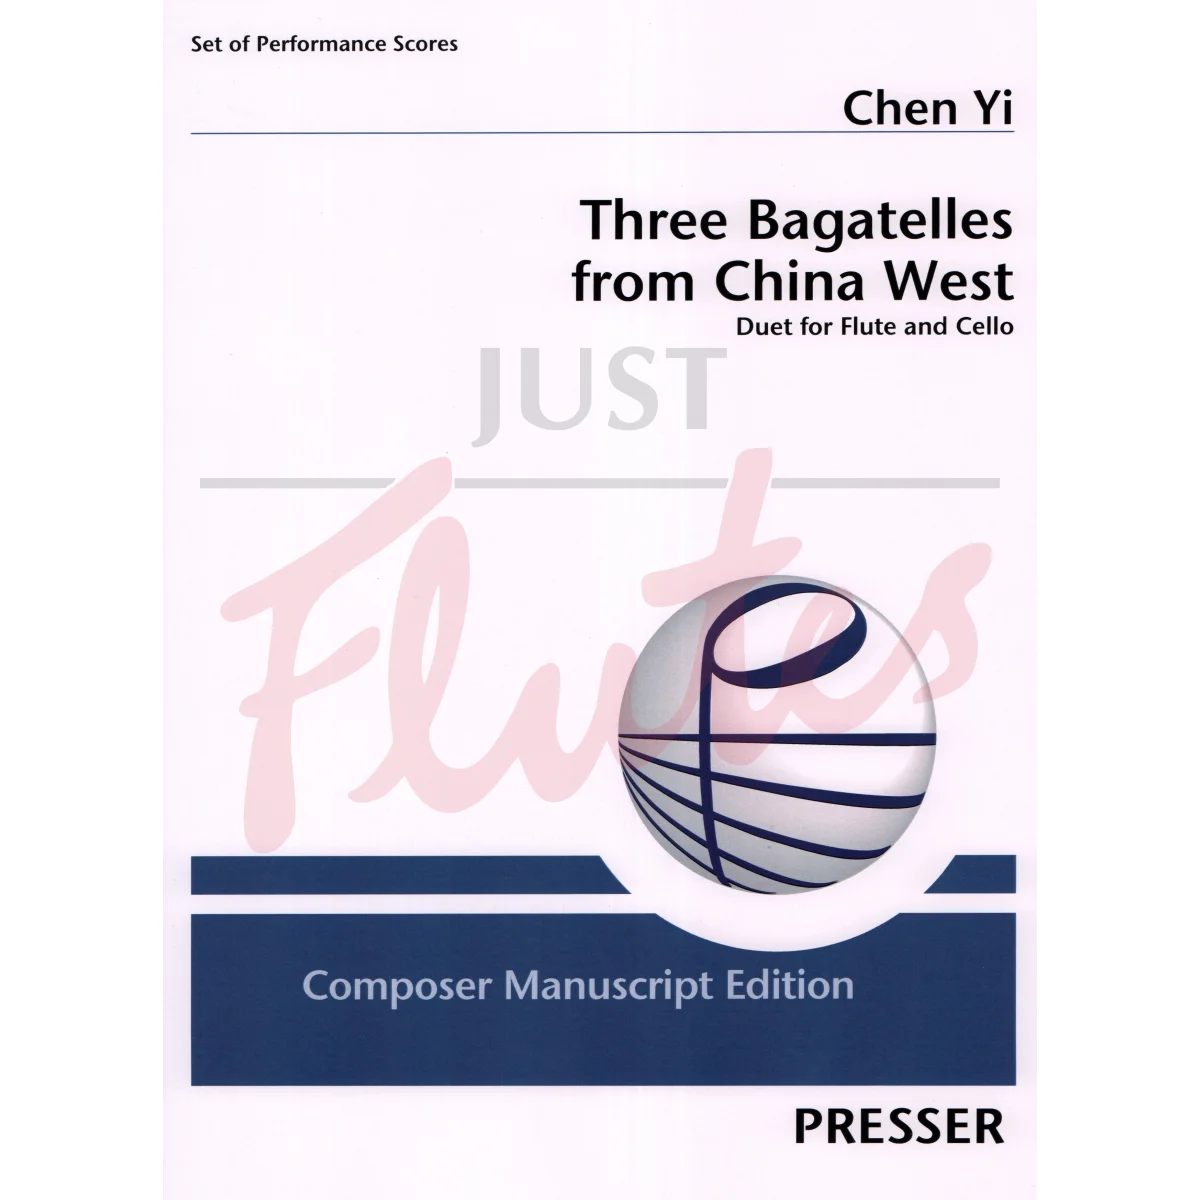 Three Bagatelles from China West: Duet for Flute and Cello